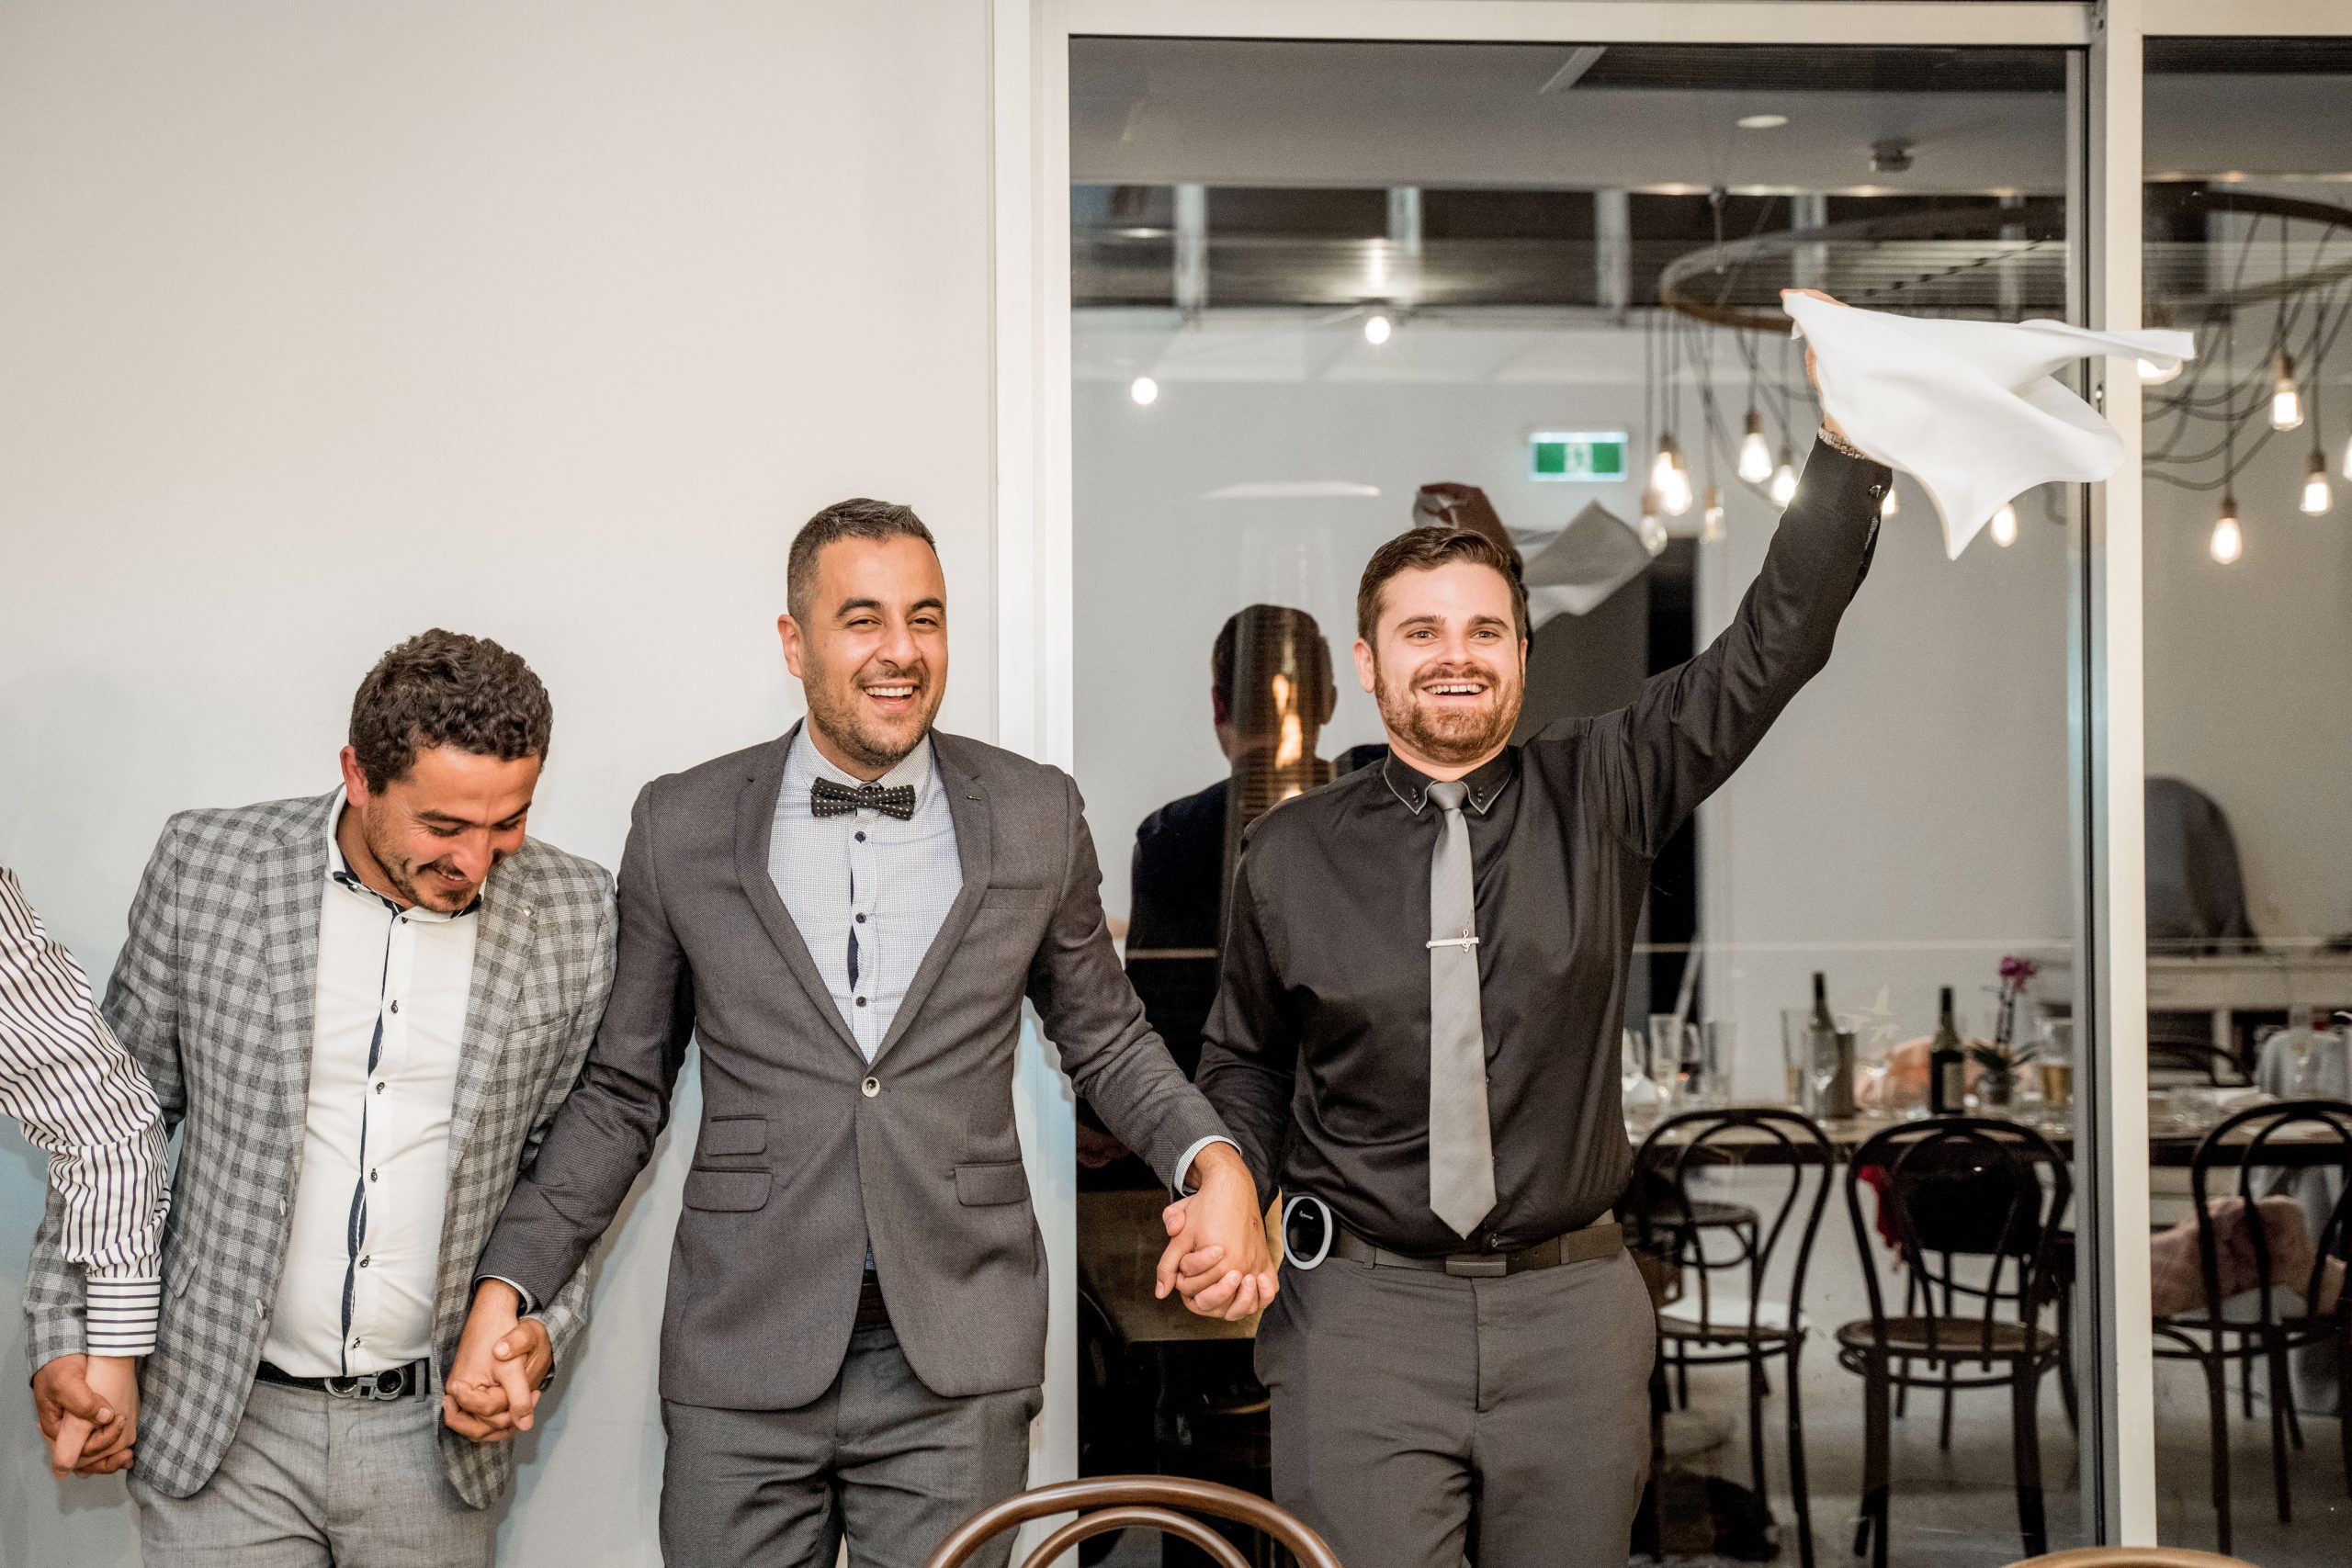 Nathan Cassar dancing with guests holding a napkin in the air